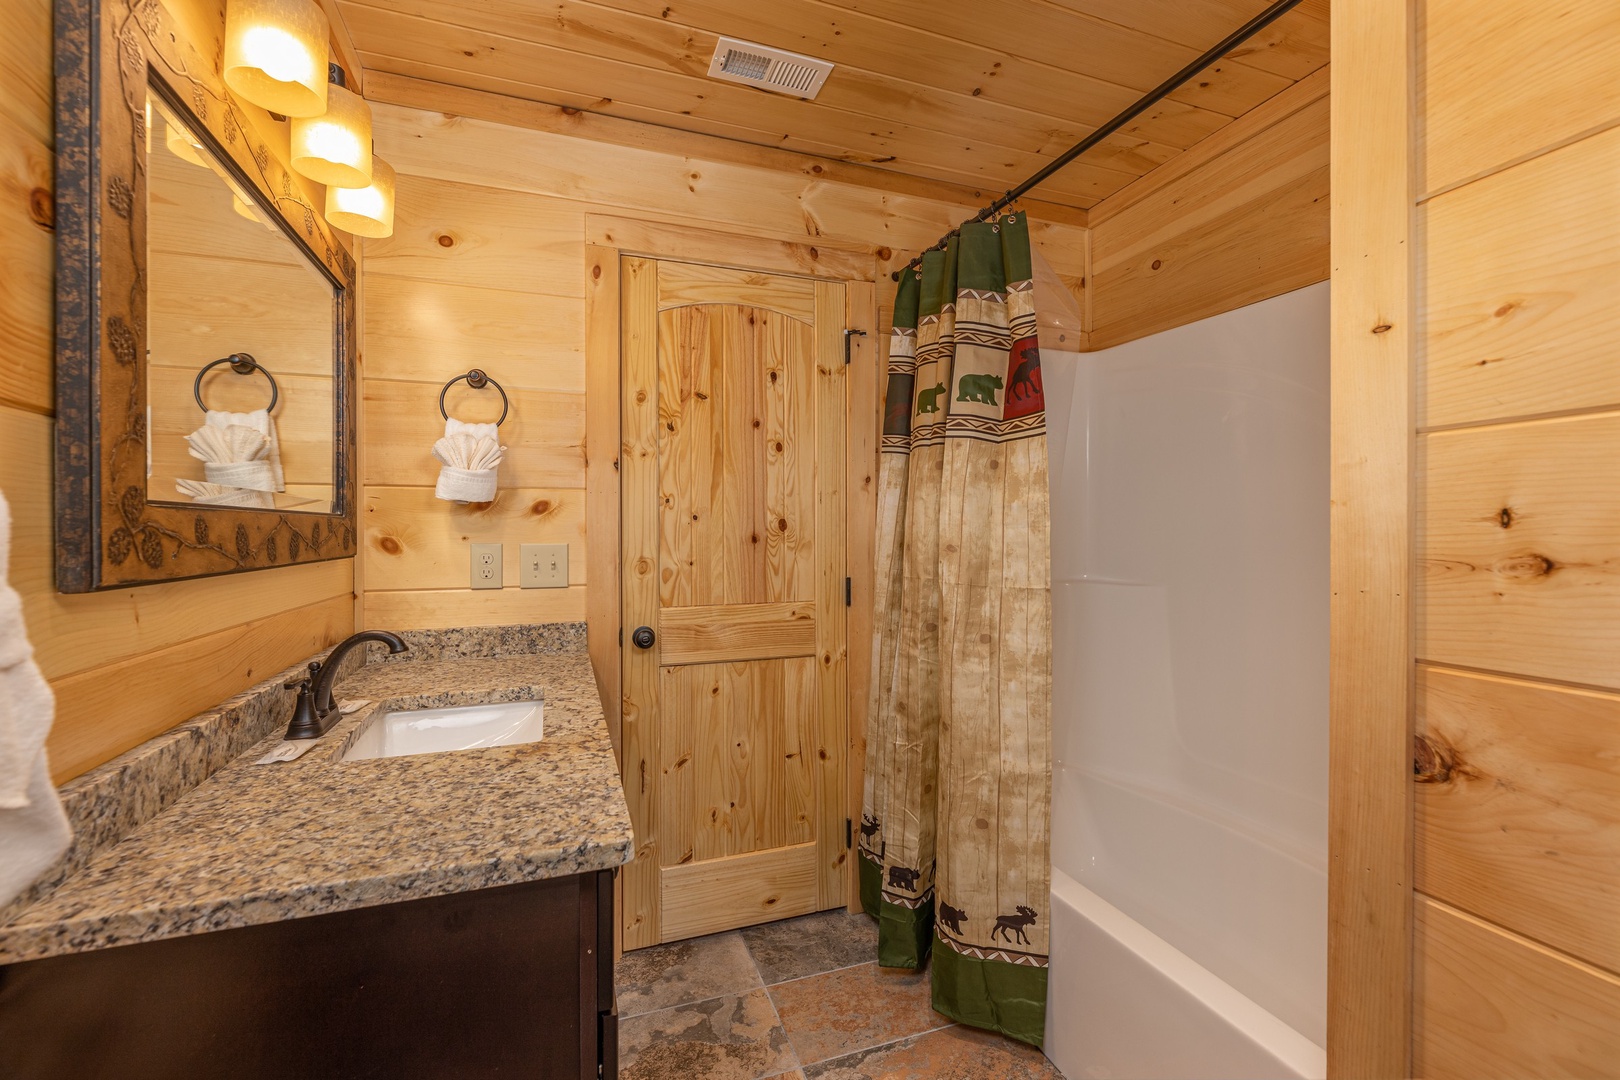 Bathroom with a tub and shower at Bessy Bears Cabin, a 2 bedroom cabin rental located inGatlinburg